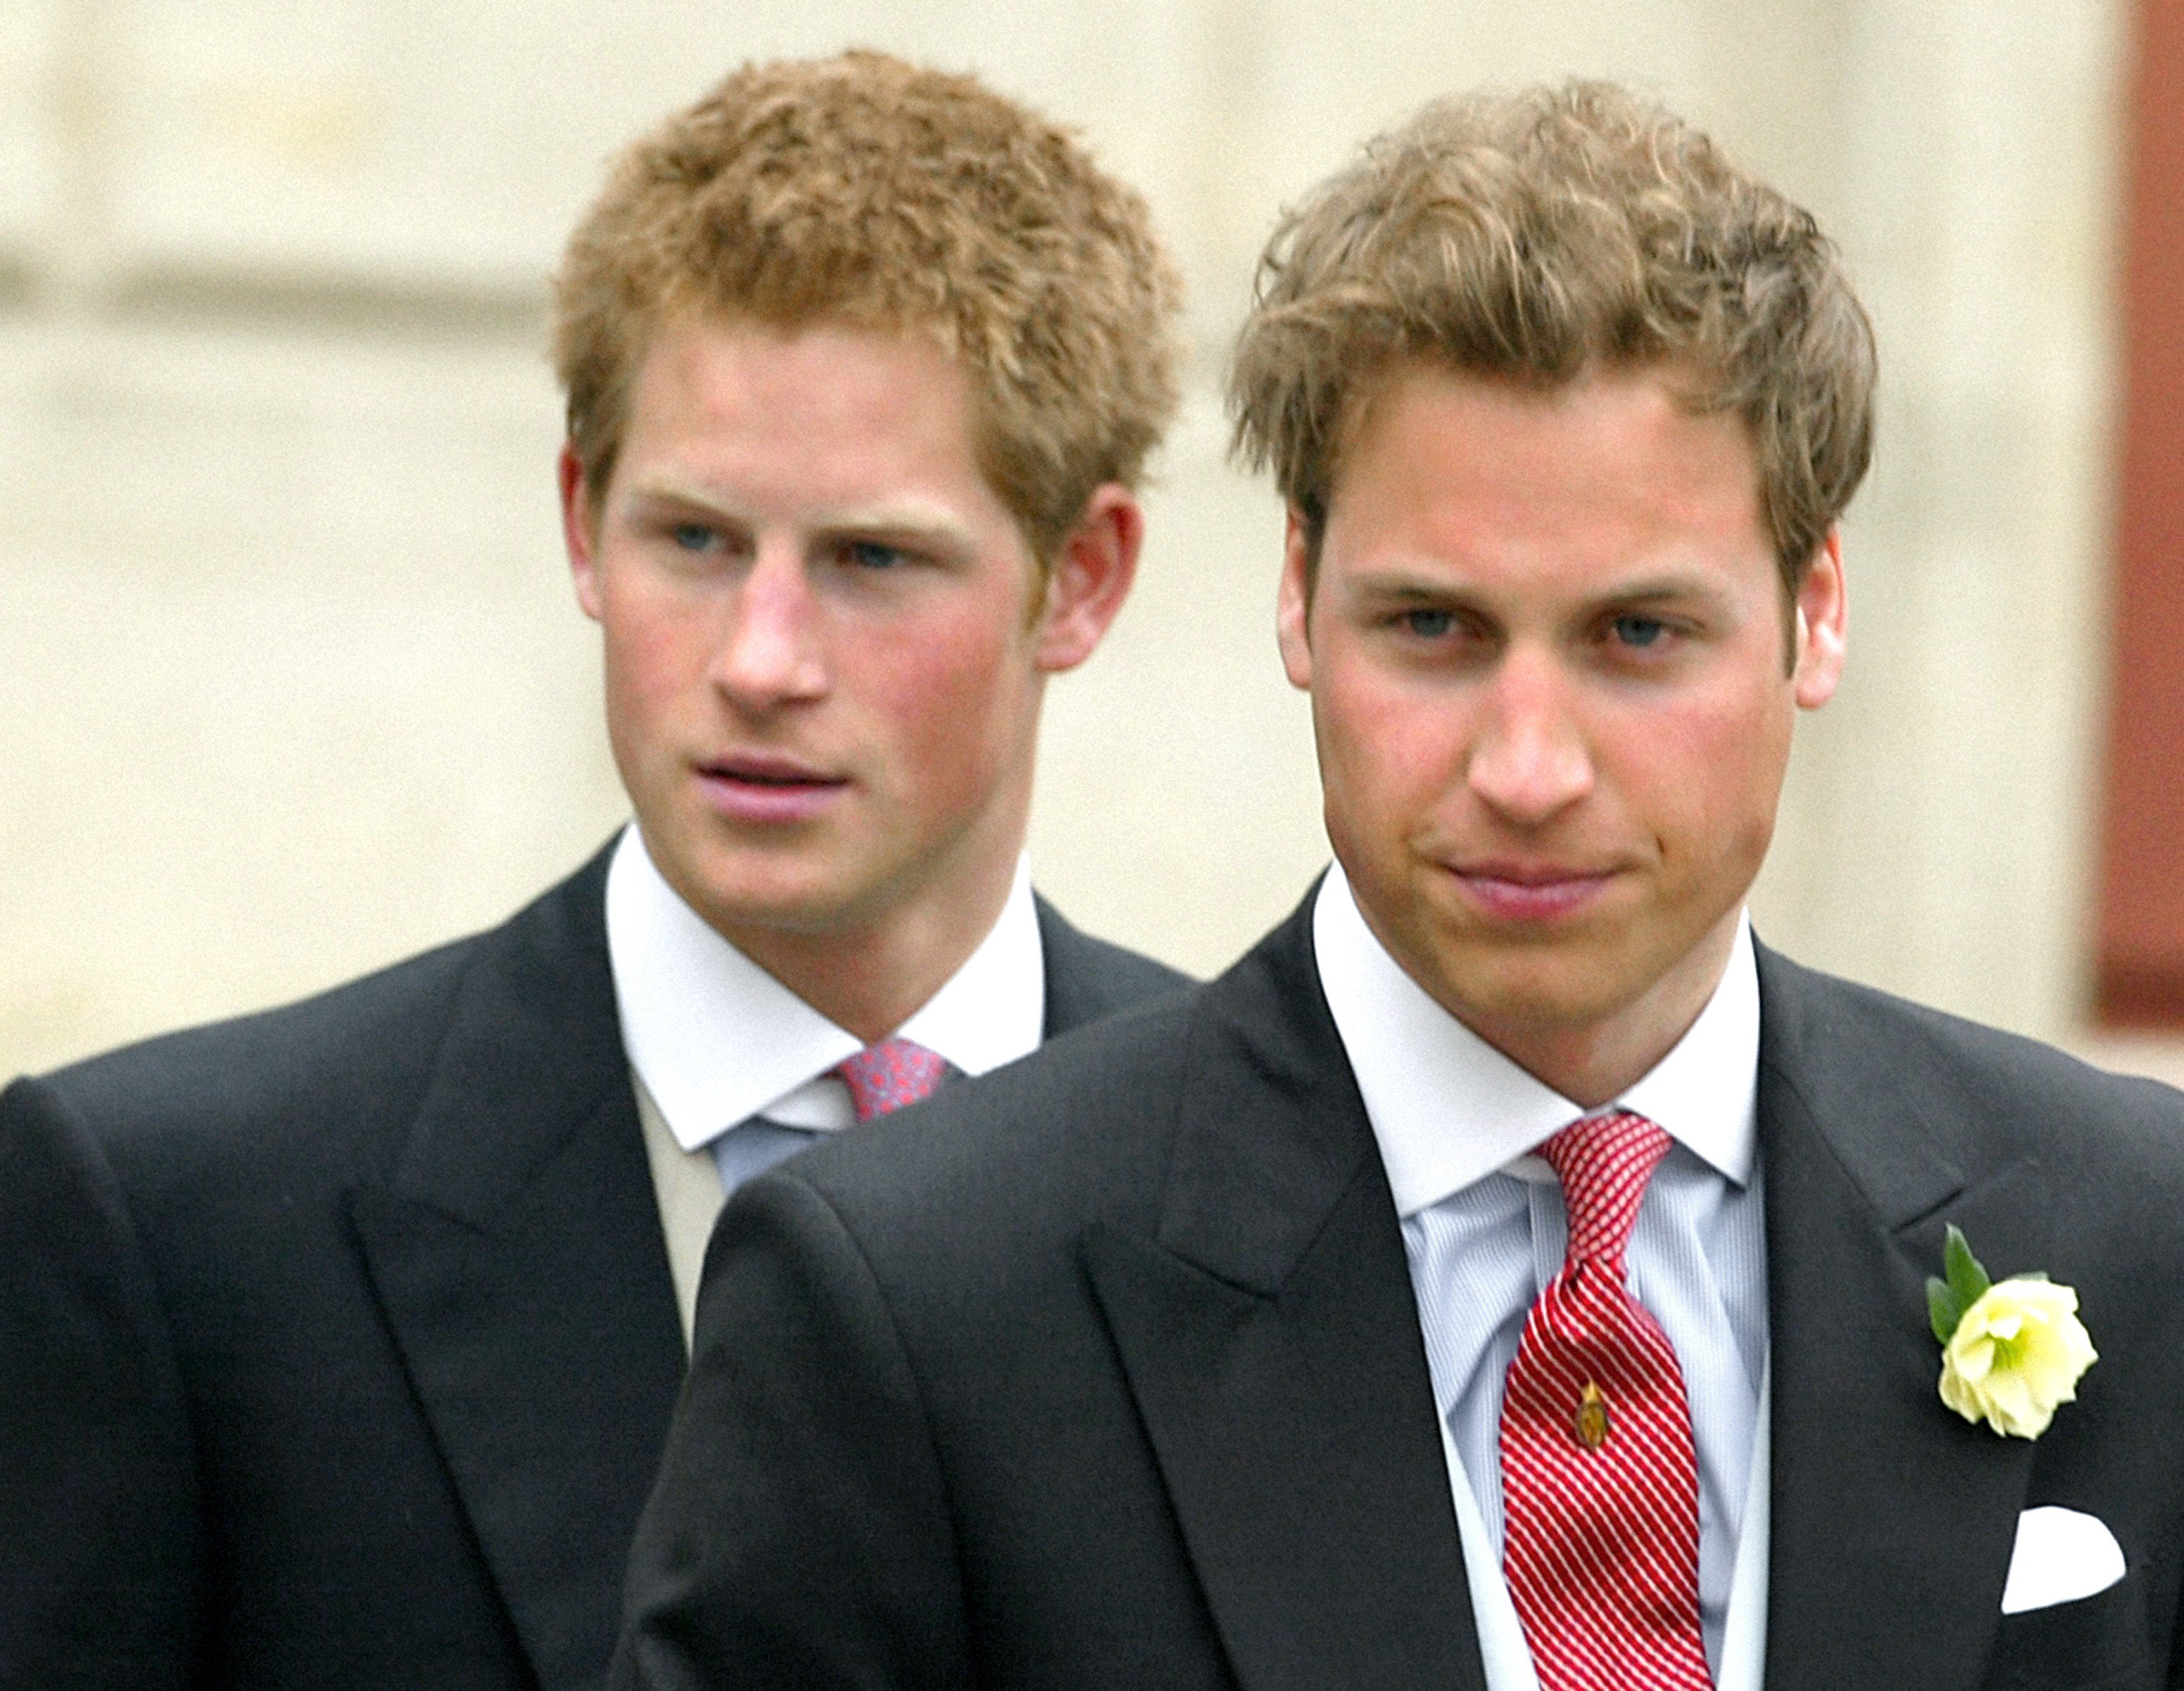 What Prince William and Prince Harry's body language shows after Prince Charles and Camilla Parker Bowles's wedding